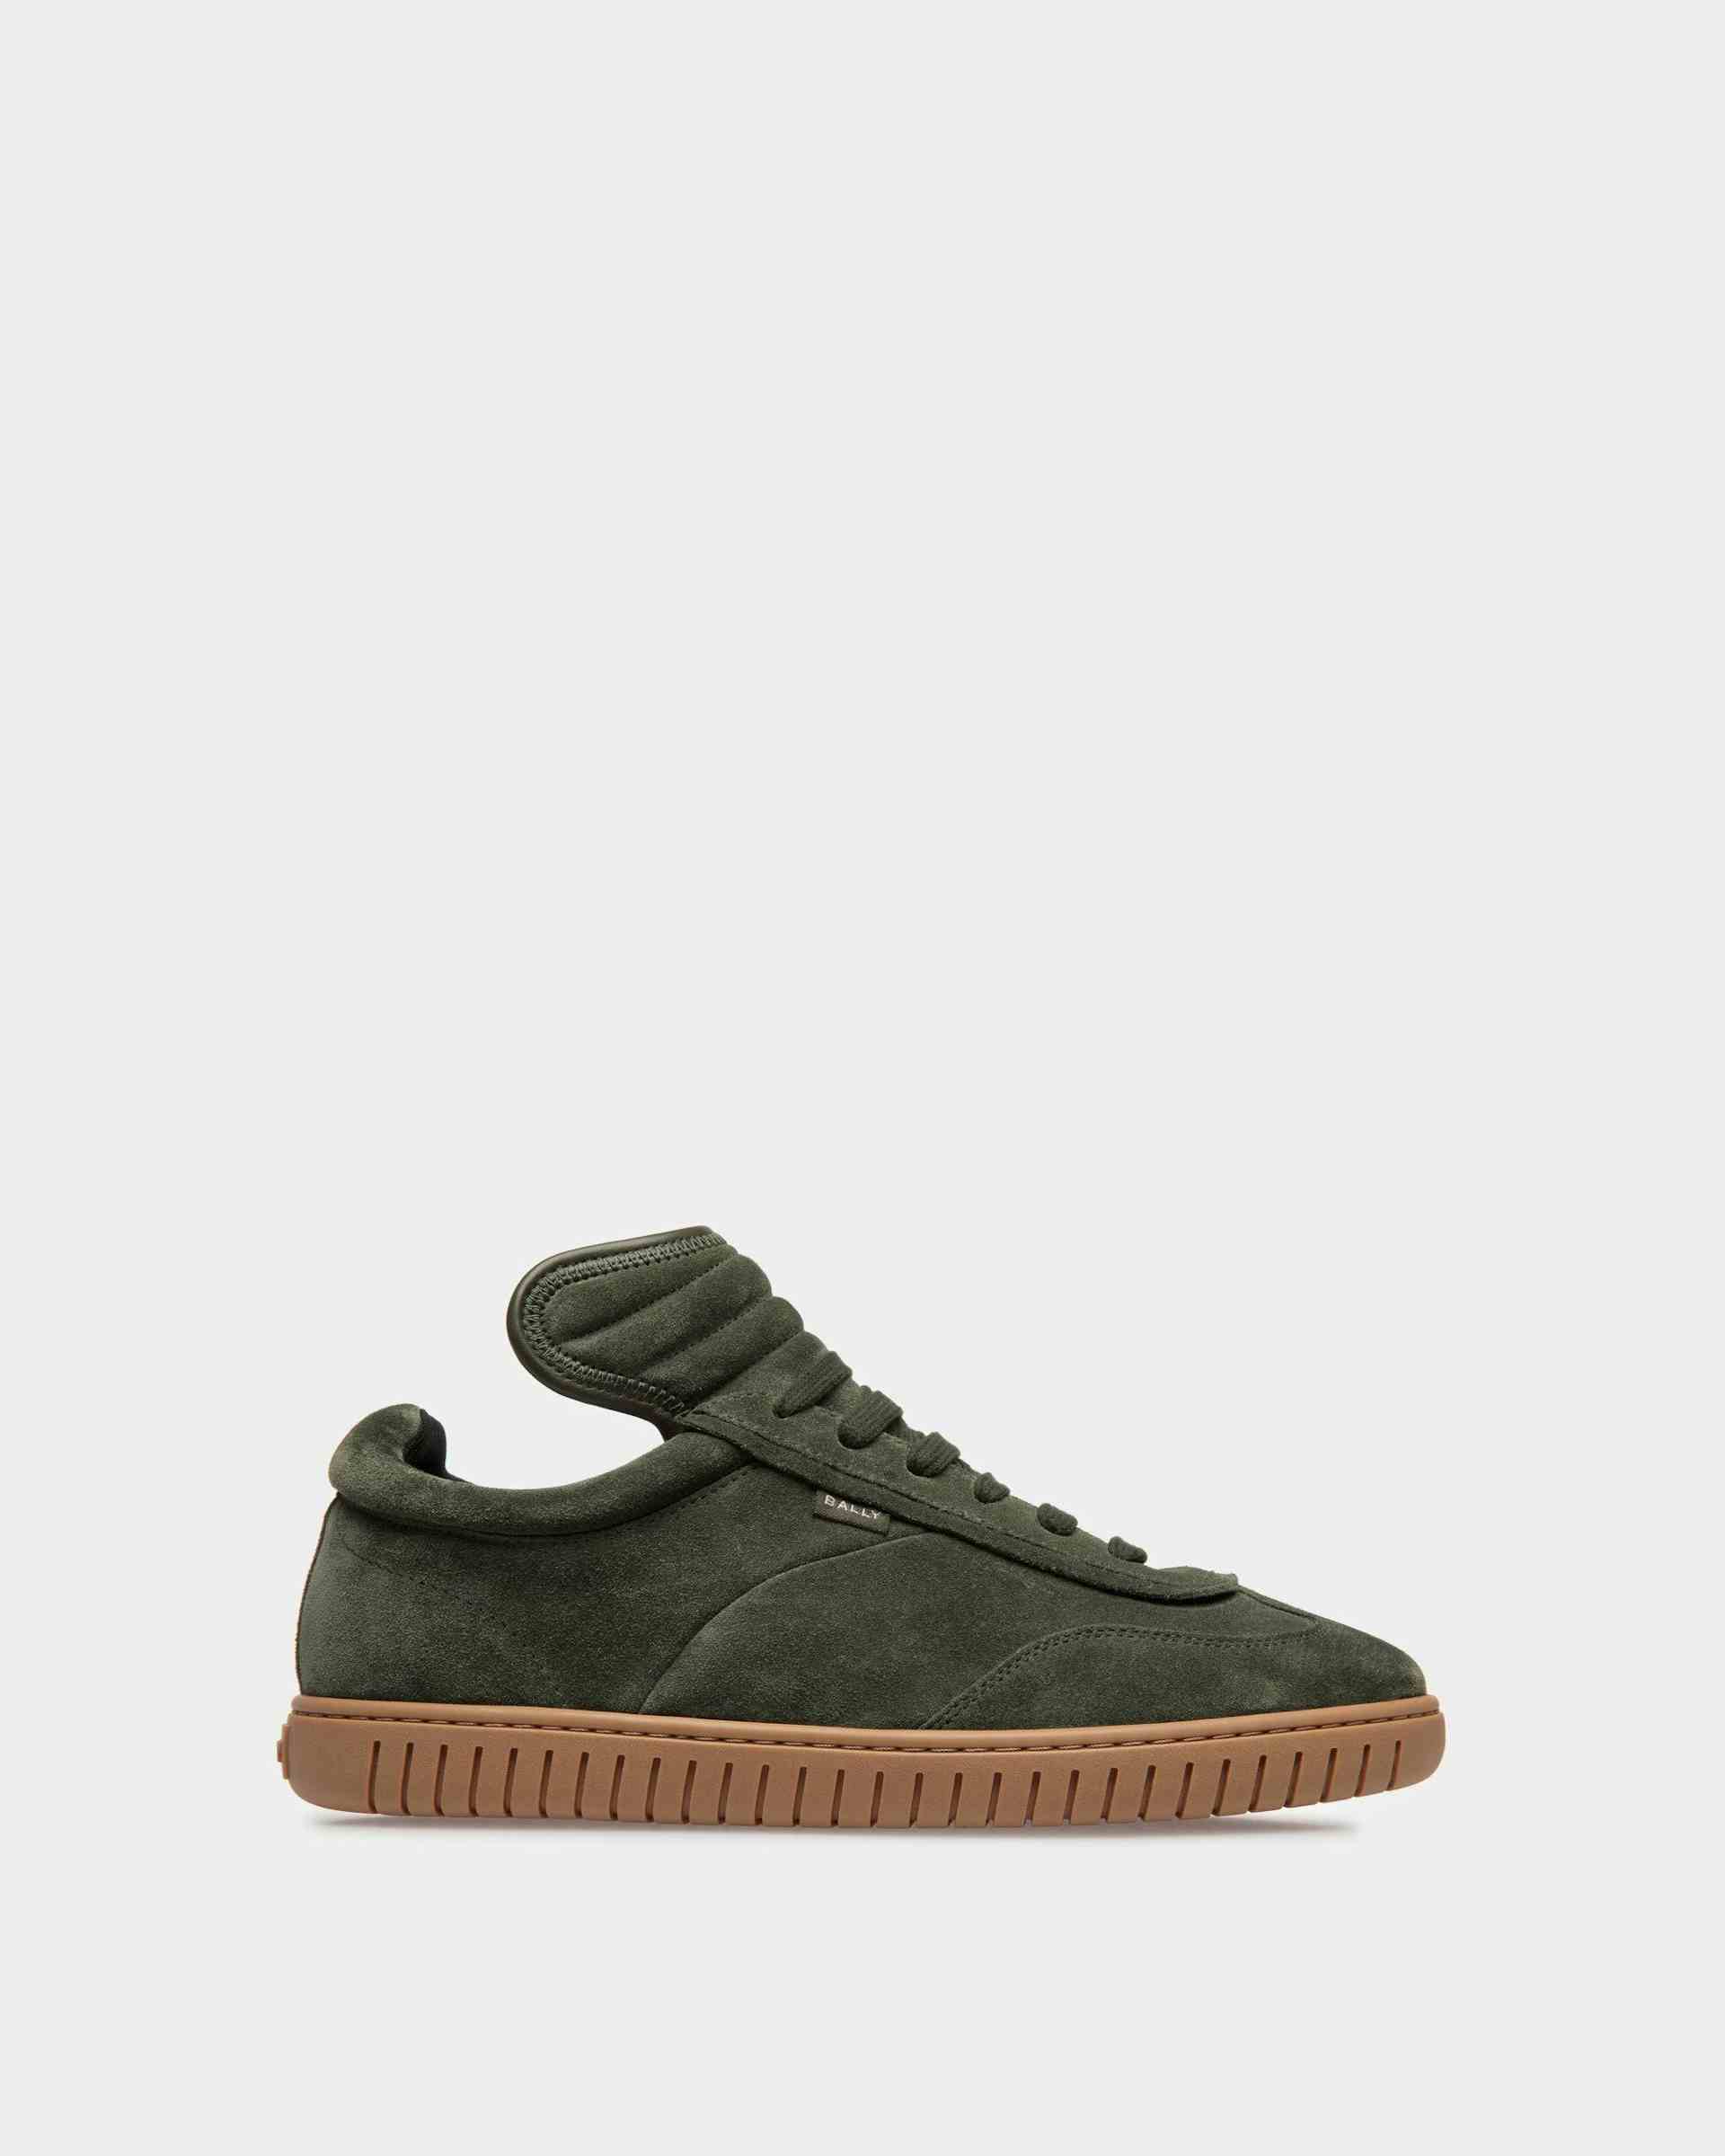 Player Sneakers In Green And Amber Leather - Men's - Bally